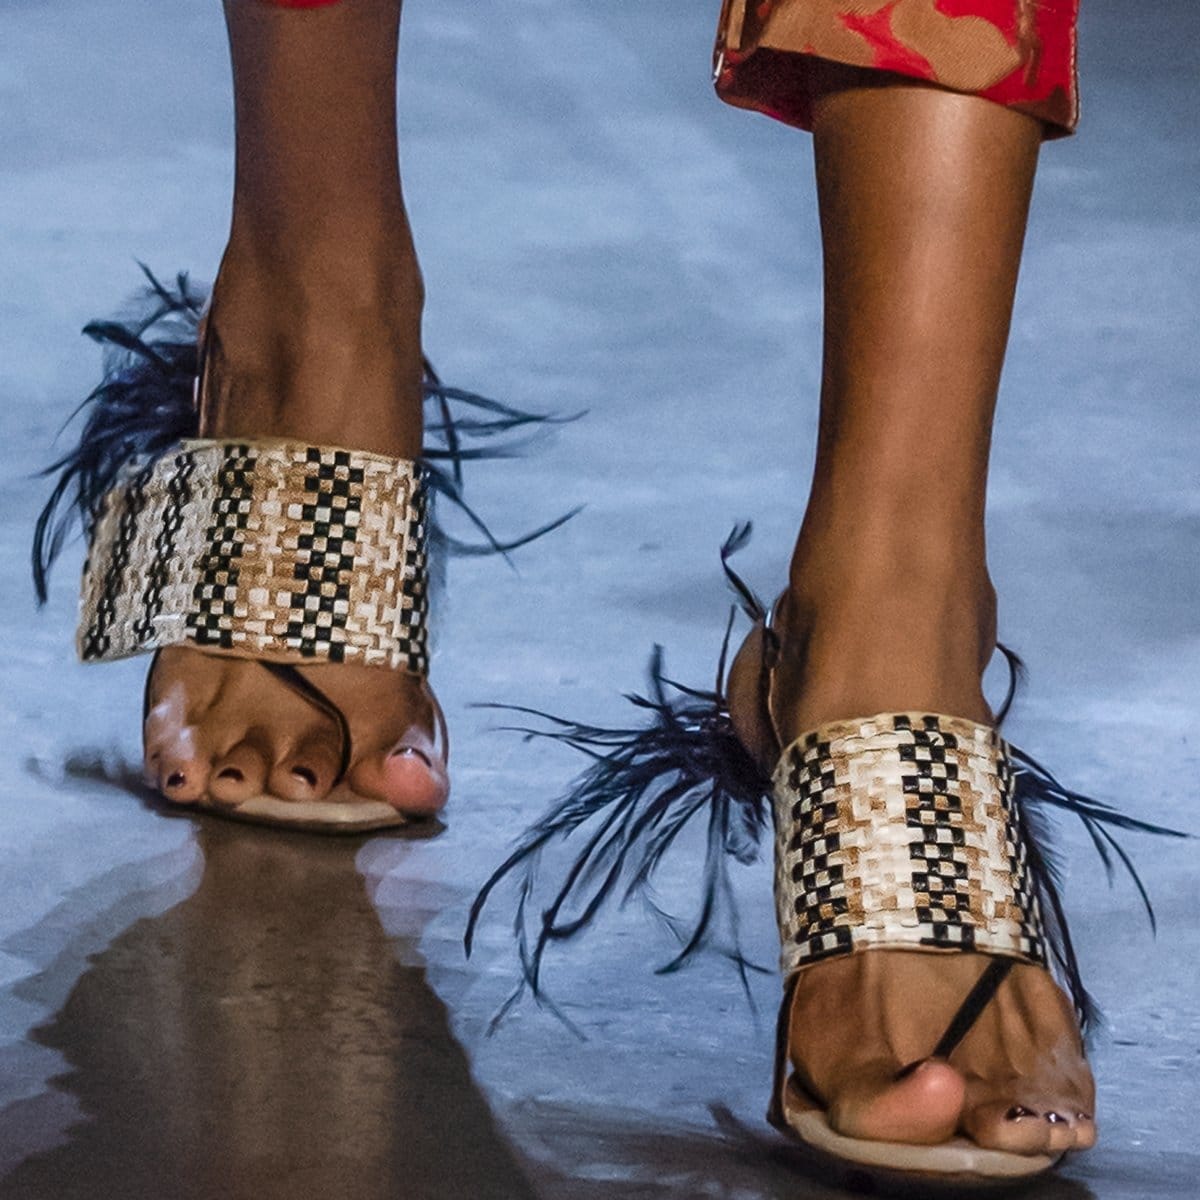 A model shows off her feet in fringe sandals as part of the Prabal Gurung fashion show during New York Fashion Week